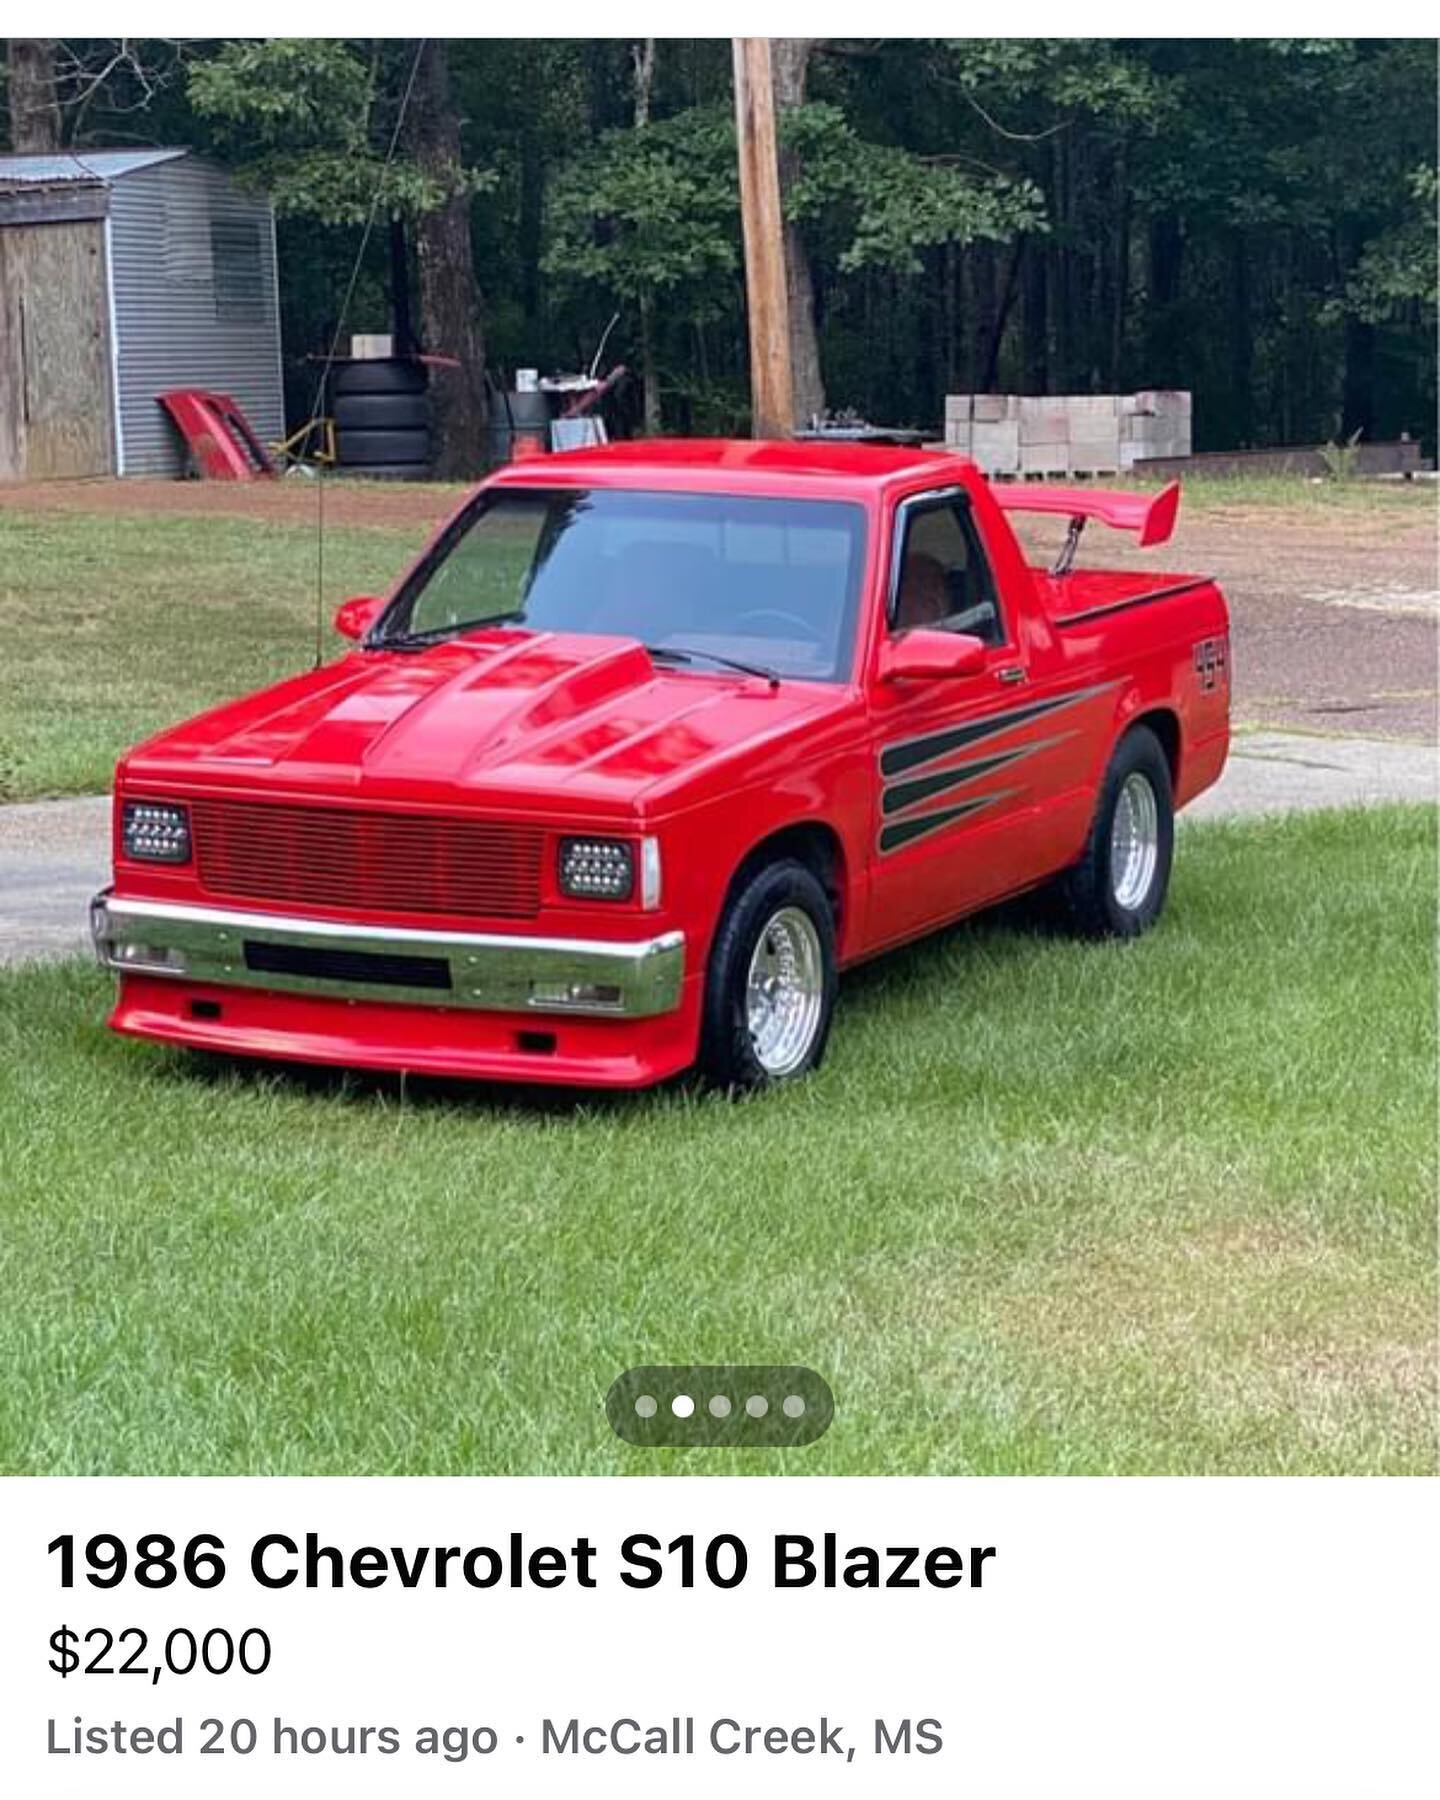 Another marketplace find , this is a rad build but it&rsquo;s a little bit over my budget 🤣 

Visit us at S10LIFE.ORG
#S10LIFE
_____________________________
#s10 #squarebody #gmc #chevy #chevorlet #dragracing #carculture #minitruck #car #cars #truck